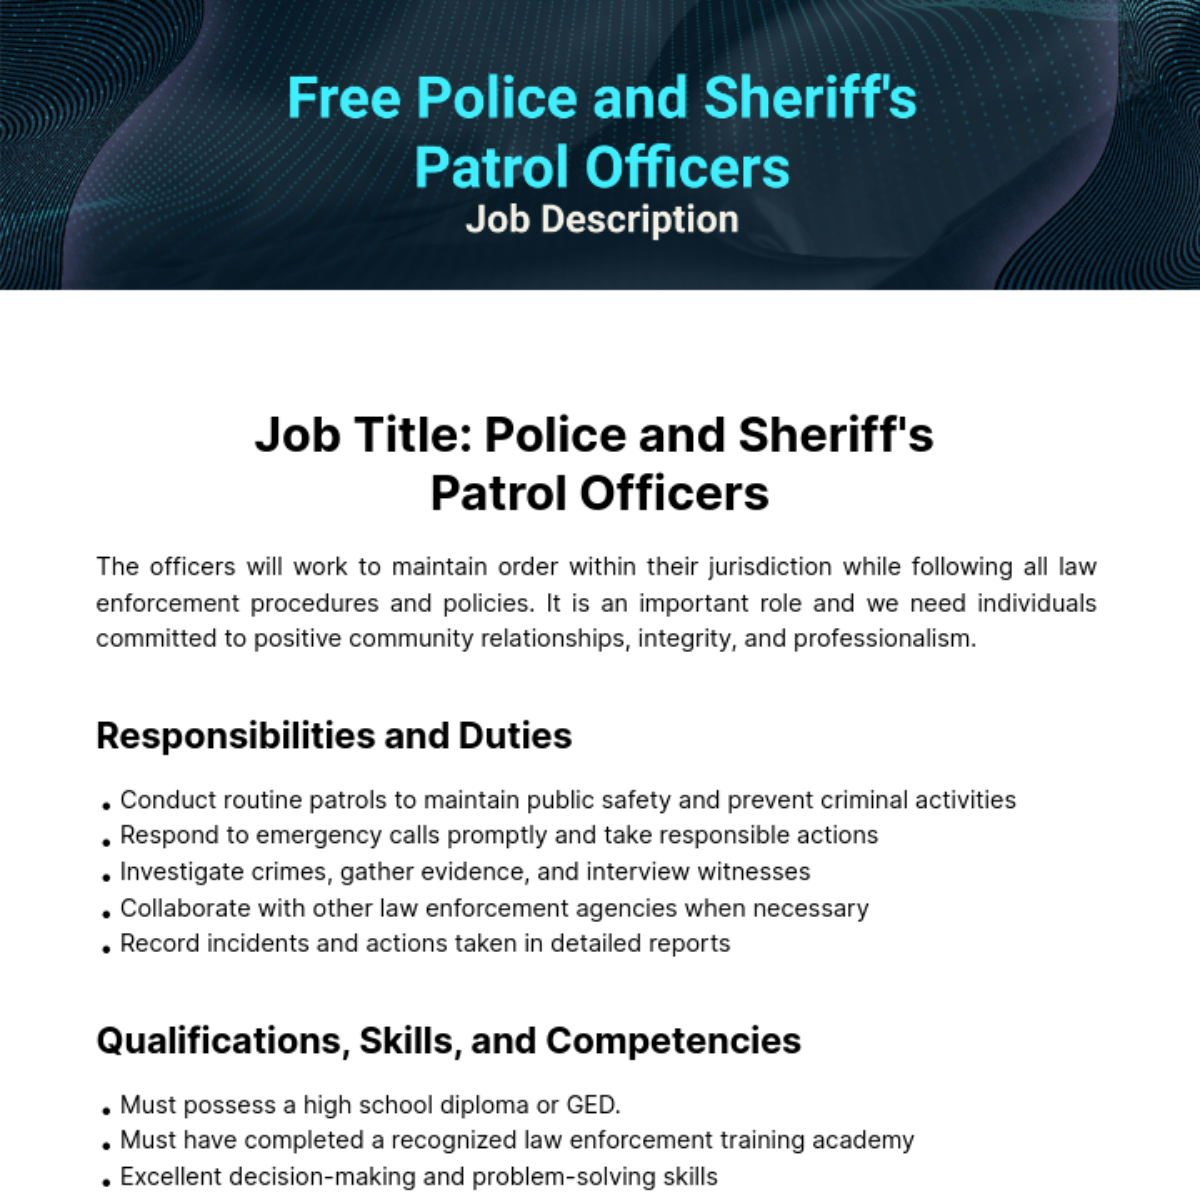 Police and Sheriff's Patrol Officers Job Description Template